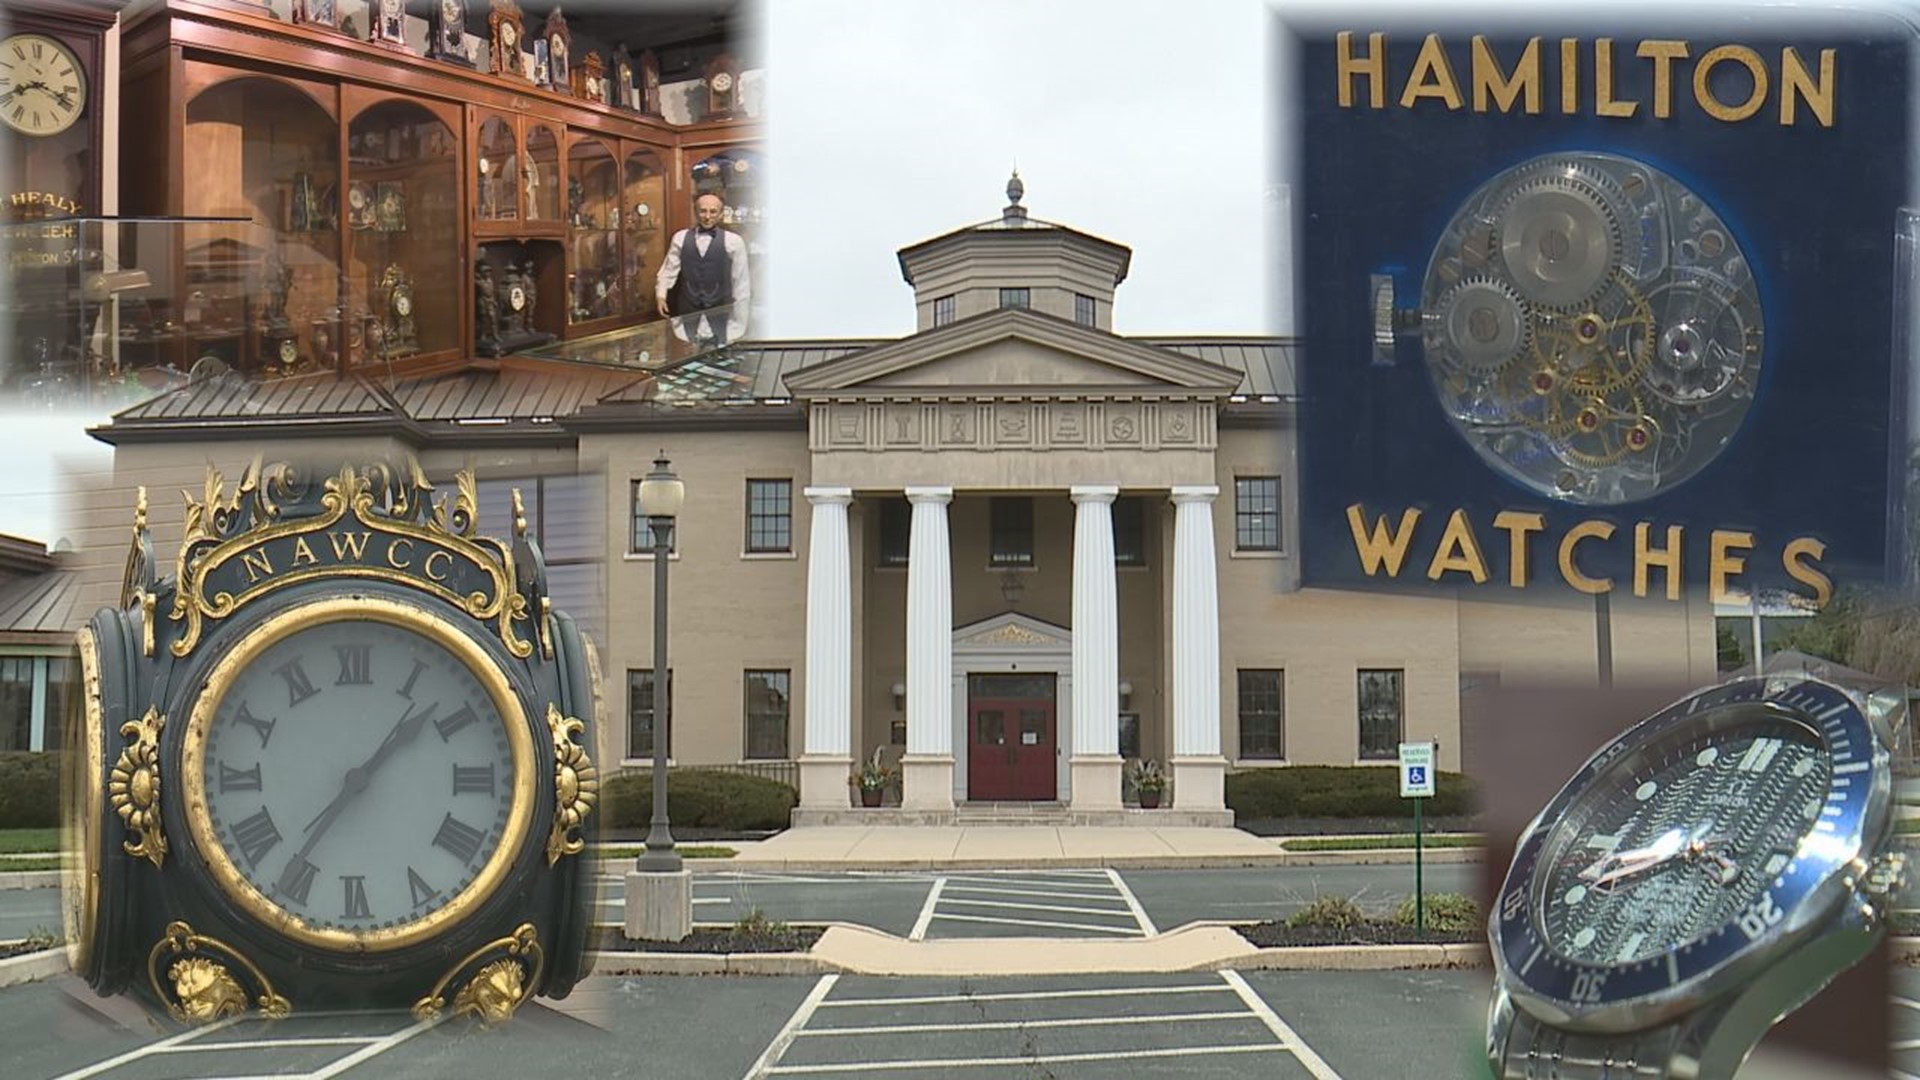 The largest collection of timepieces in North America can be found in Columbia, Pennsylvania.